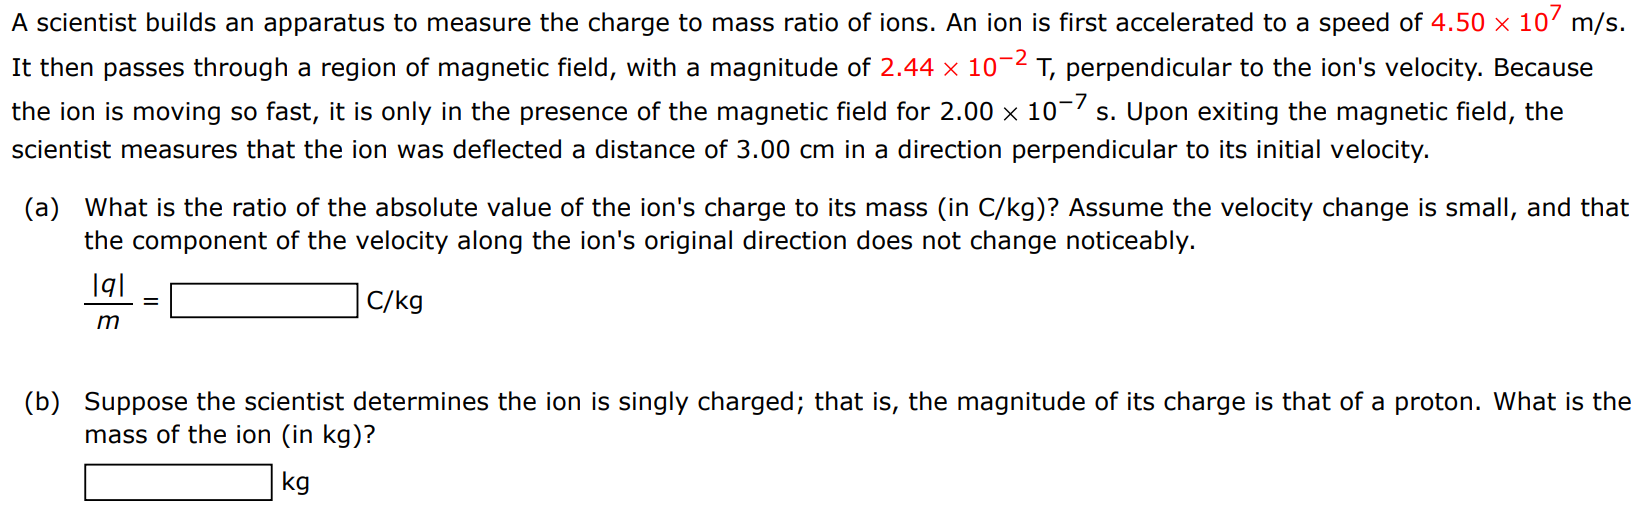 A scientist builds an apparatus to measure the charge to mass ratio of ions. An ion is first accelerated to a speed of 4.50×107 m/s. It then passes through a region of magnetic field, with a magnitude of 2.44×10−2 T, perpendicular to the ion's velocity. Because the ion is moving so fast, it is only in the presence of the magnetic field for 2.00×10−7 s. Upon exiting the magnetic field, the scientist measures that the ion was deflected a distance of 3.00 cm in a direction perpendicular to its initial velocity. (a) What is the ratio of the absolute value of the ion's charge to its mass (in C/kg )? Assume the velocity change is small, and that the component of the velocity along the ion's original direction does not change noticeably. |q| m = Cg (b) Suppose the scientist determines the ion is singly charged; that is, the magnitude of its charge is that of a proton. What is the mass of the ion (in kg)? kg 